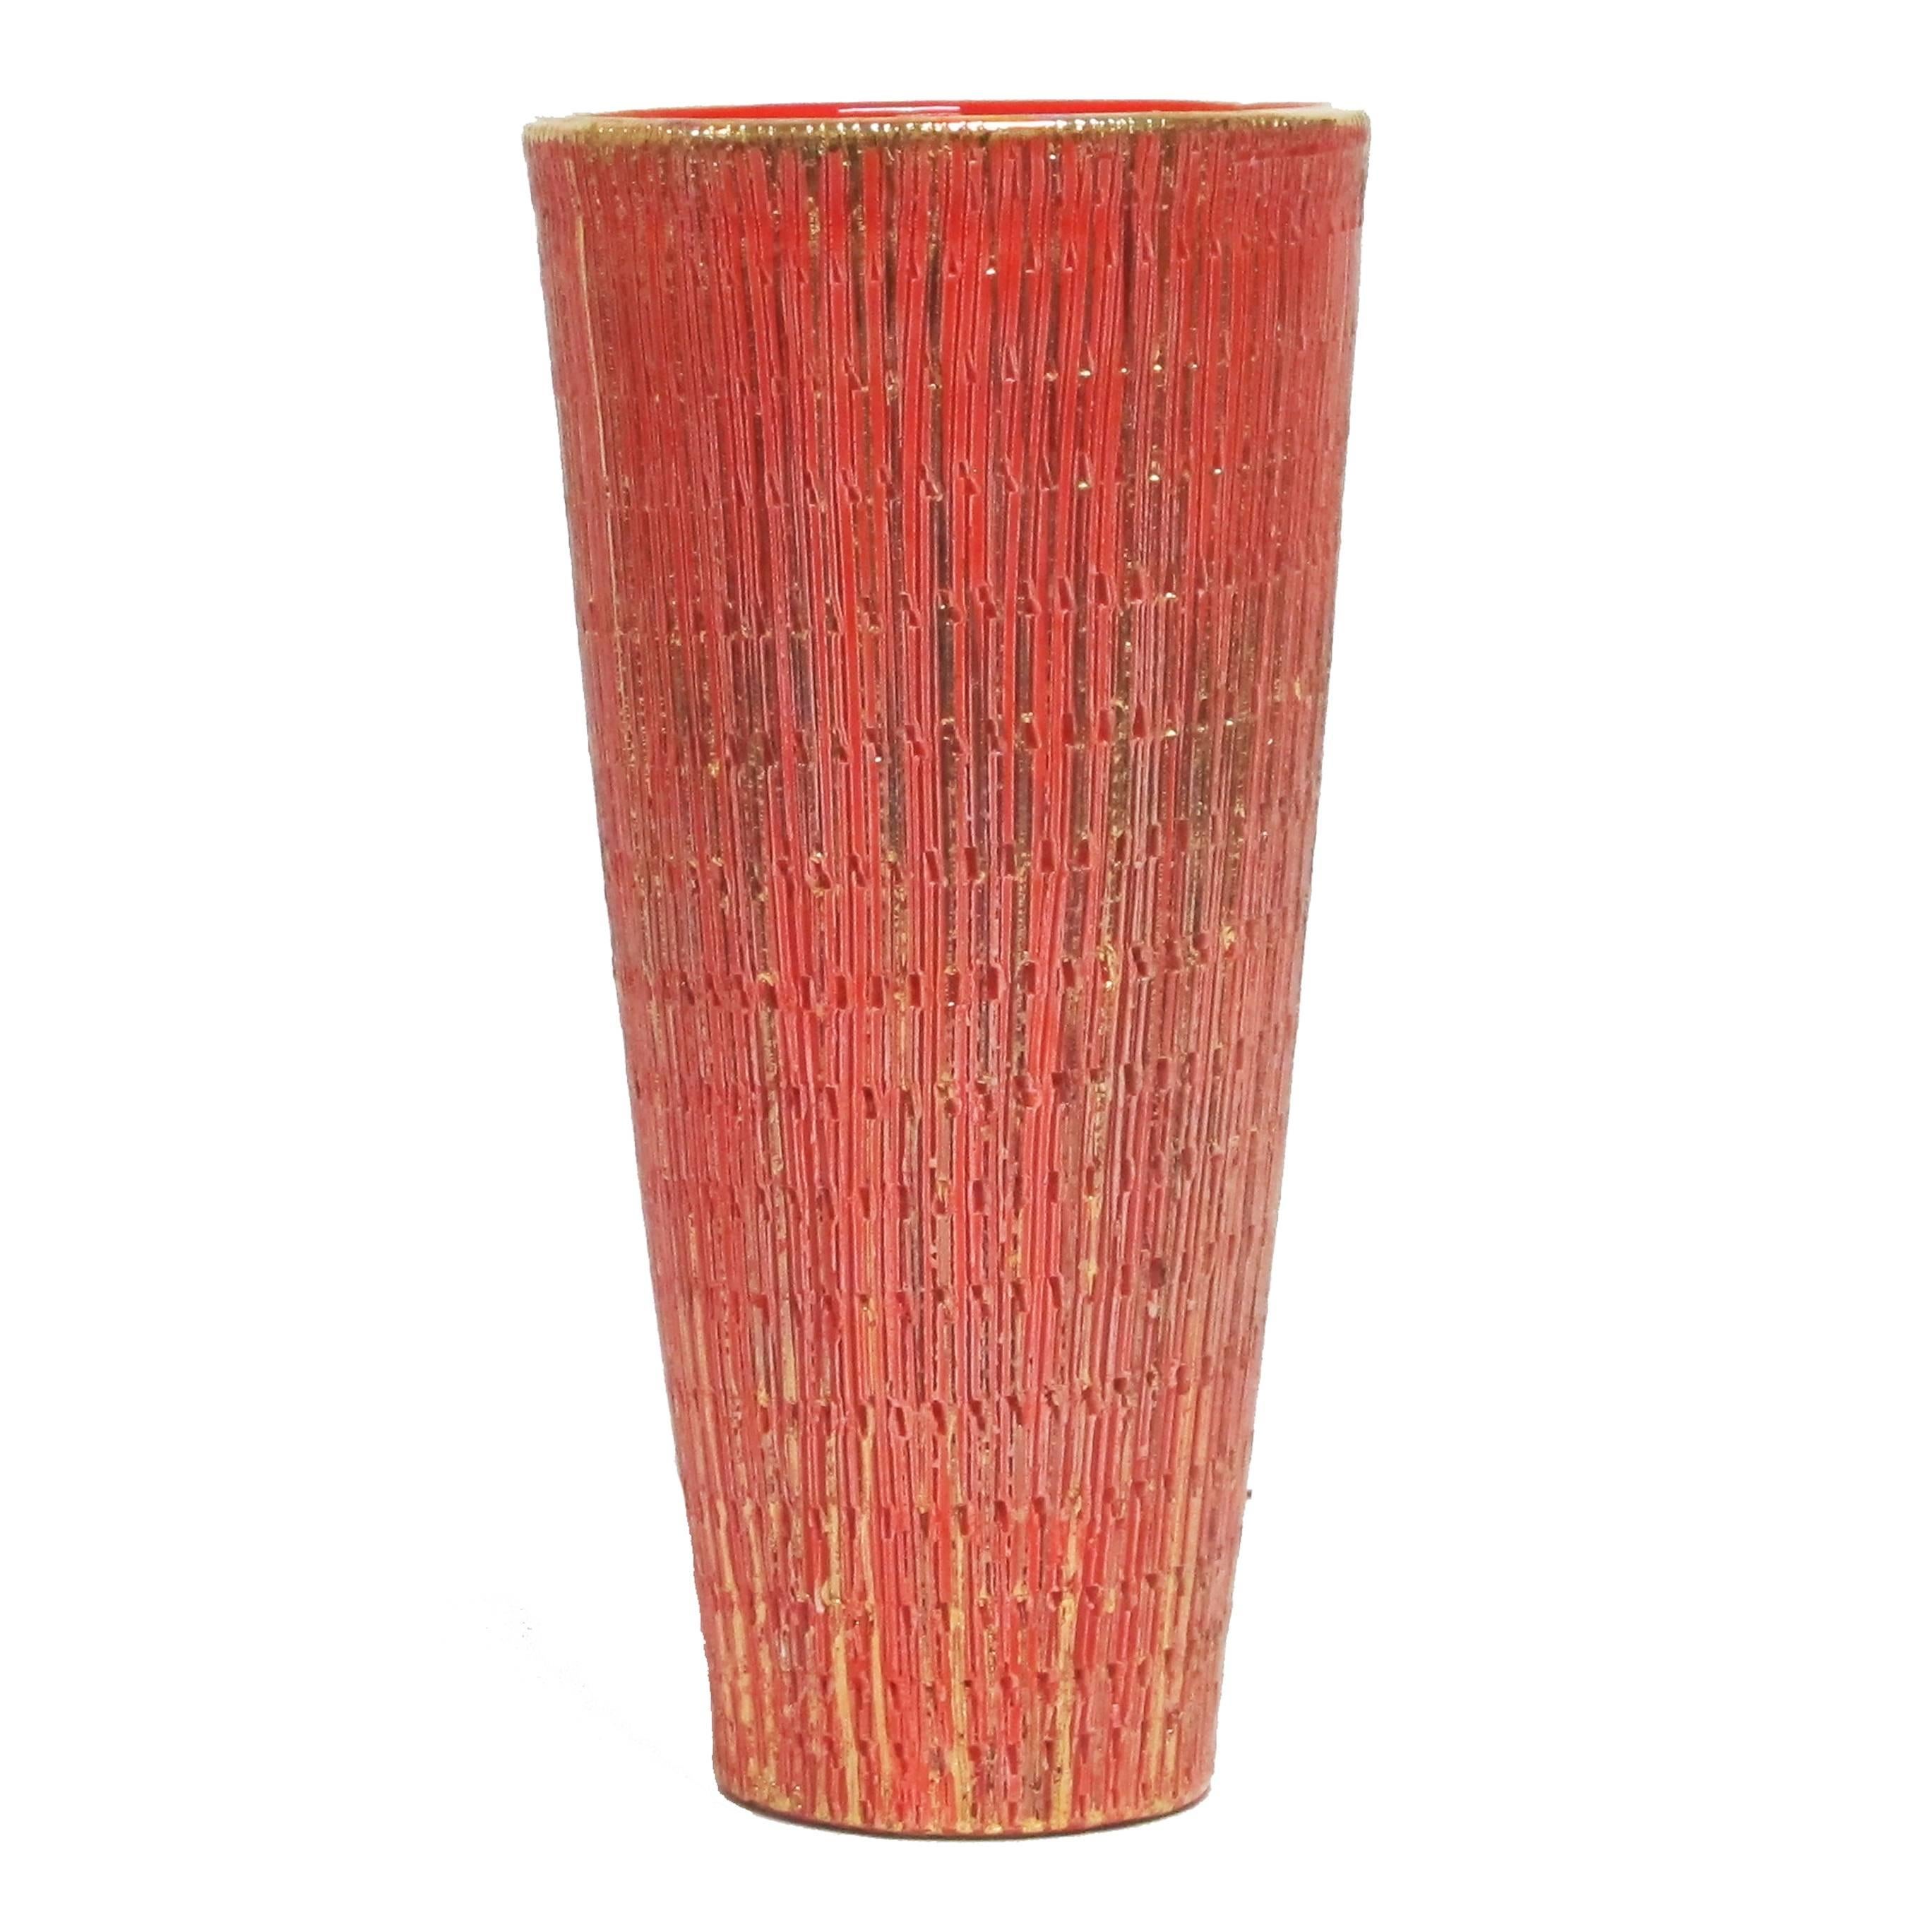 Bitossi Seta vase, ceramic orange and gold, signed. Small scale tapered vase from Aldo Londi's Seta (Silk) series. The rim is glazed with a gold band and the body is decorated with an intricate pattern of textured orange and gold vertical stripes.